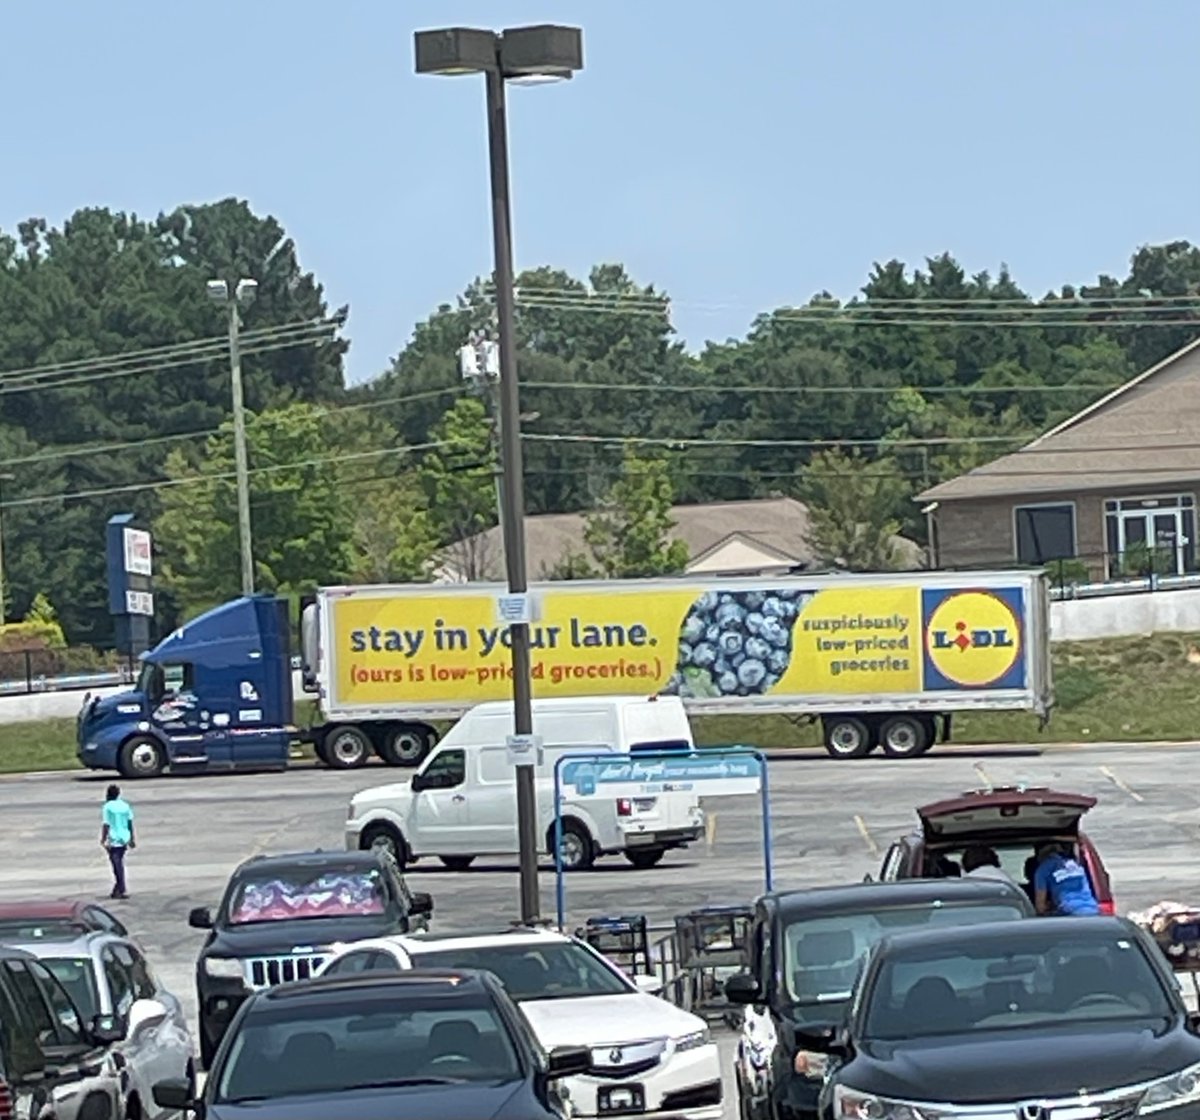 One day after opening a new store, a Lidl truck “breaks down” in a #foodlion parking lot down the street.
Poaching grocery customers is #Lidl dick energy methinks???